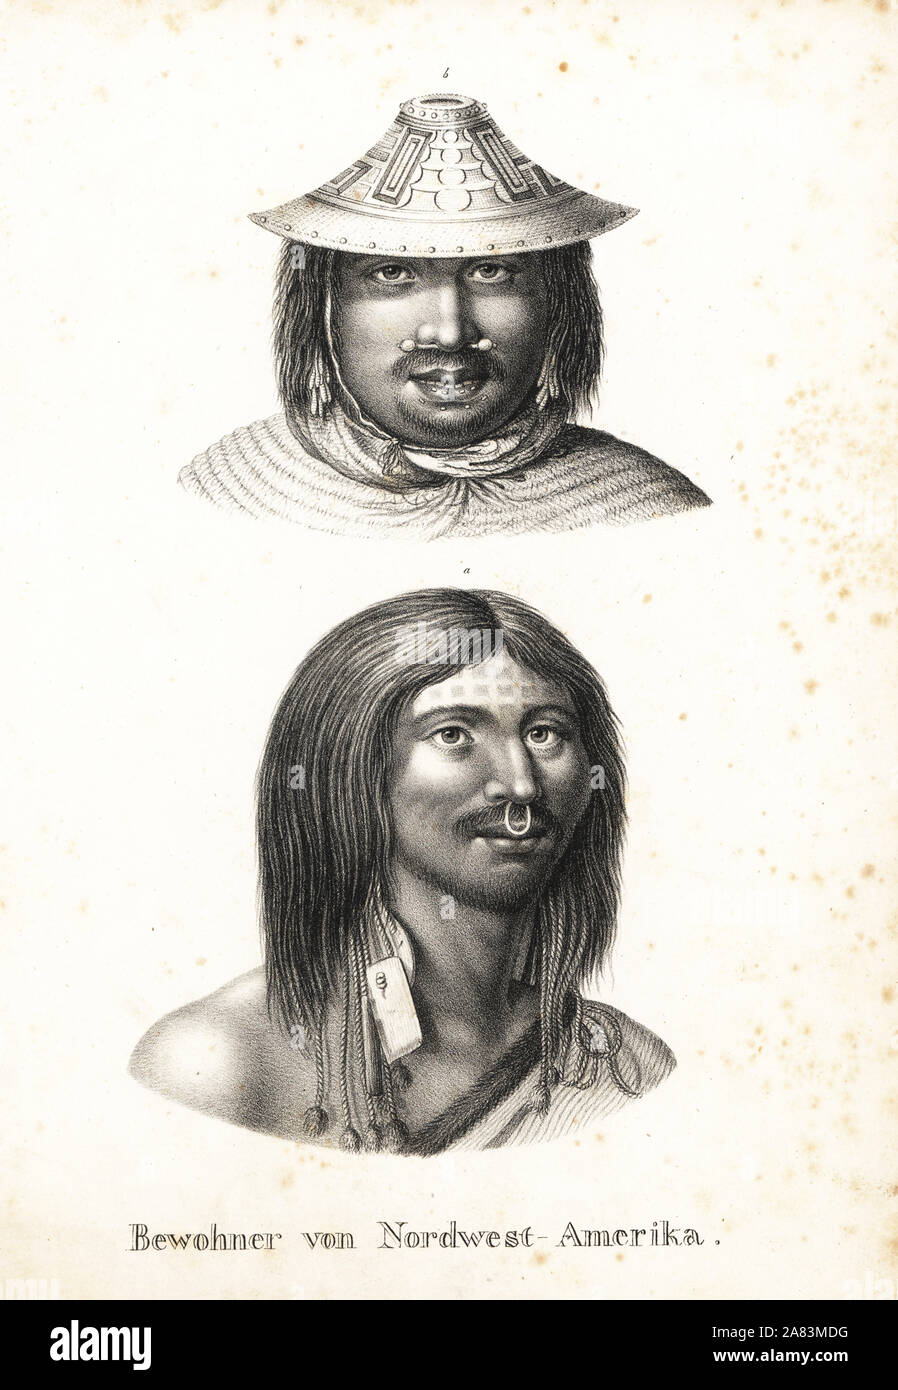 Chugach man of Prince William's Sound in conical decorated hat, nose ornament, and labrets of walrus ivory in his lower lip. Nootka man with tattooed brow and nose ring (both from Captain Cook's Voyages). Lithograph by Karl Joseph Brodtmann from Heinrich Rudolf Schinz's Illustrated Natural History of Men and Animals, 1836. Stock Photo